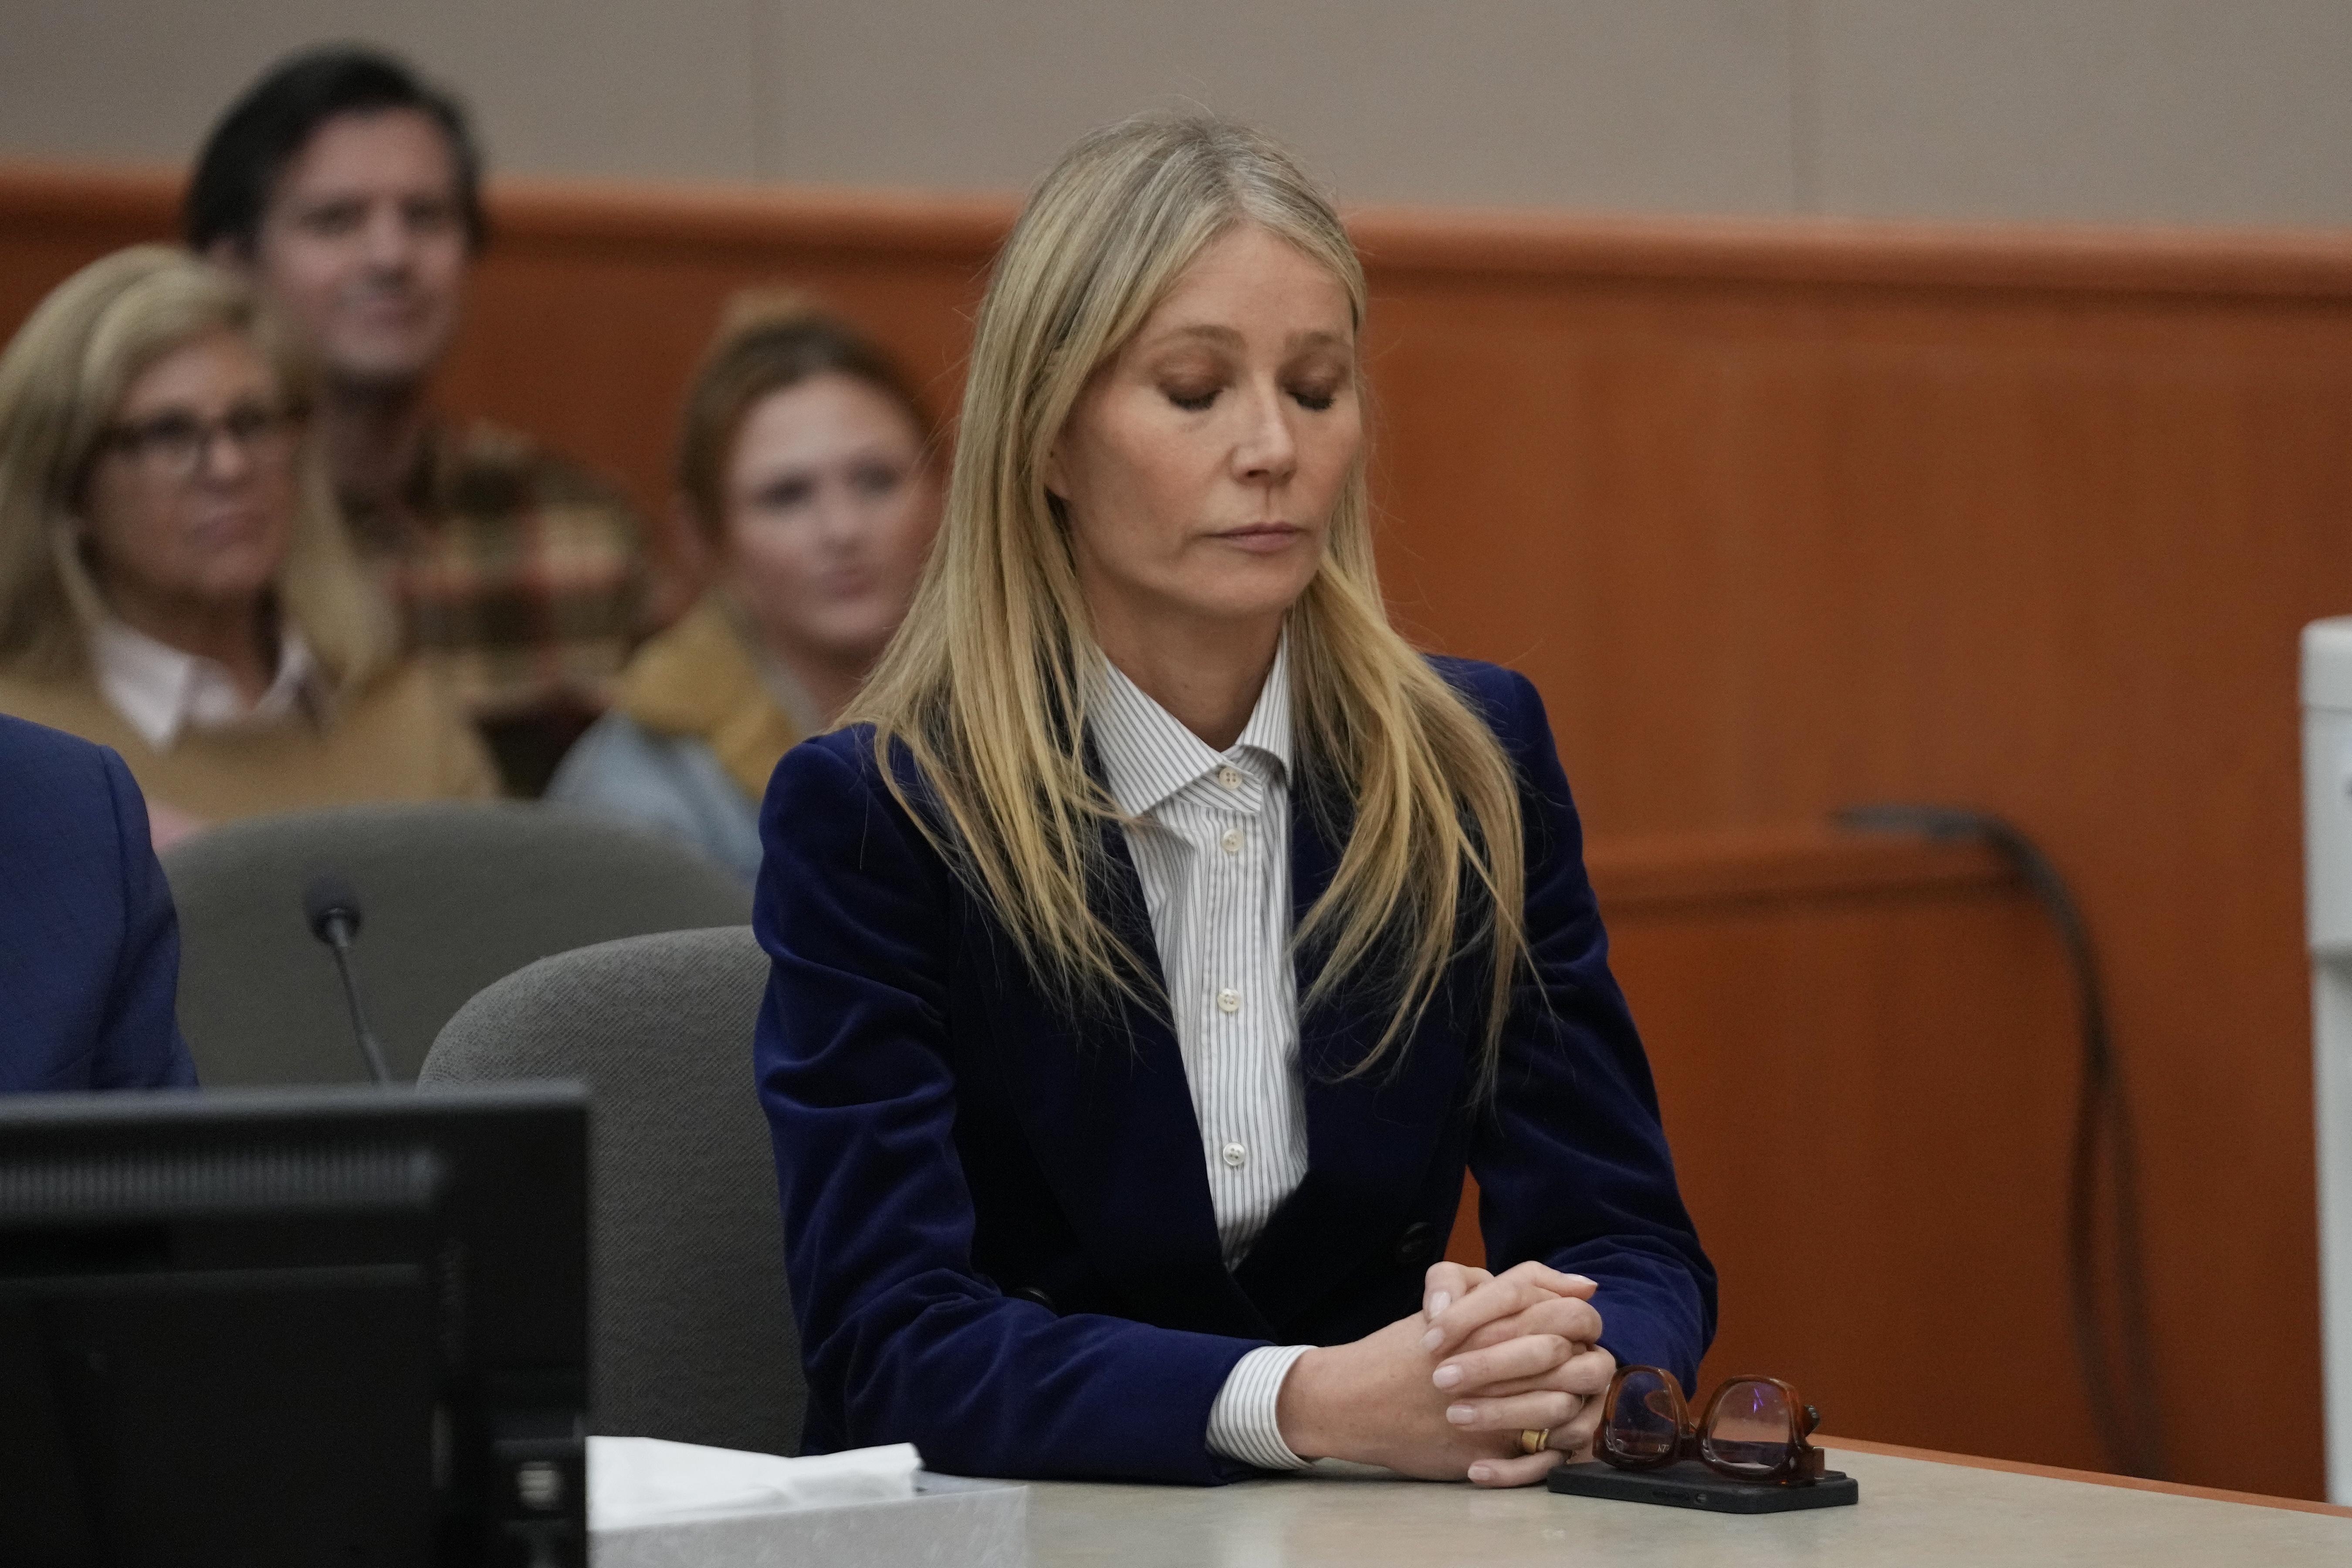 PARK CITY, UTAH - MARCH 30:  Actor Gwyneth Paltrow sits in court as the verdict is read in her civil trial over a collision with another skier on March 30, 2023, in Park City, Utah. The jury found retired optometrist Terry Sanderson "100 percent at fault" in the mishap that occurred during a run at Deer Valley Resort in Park City, Utah in 2016. Paltrow was awarded the $1 for which she had countersued.  (Photo by Rick Bowmer-Pool/Getty Images)